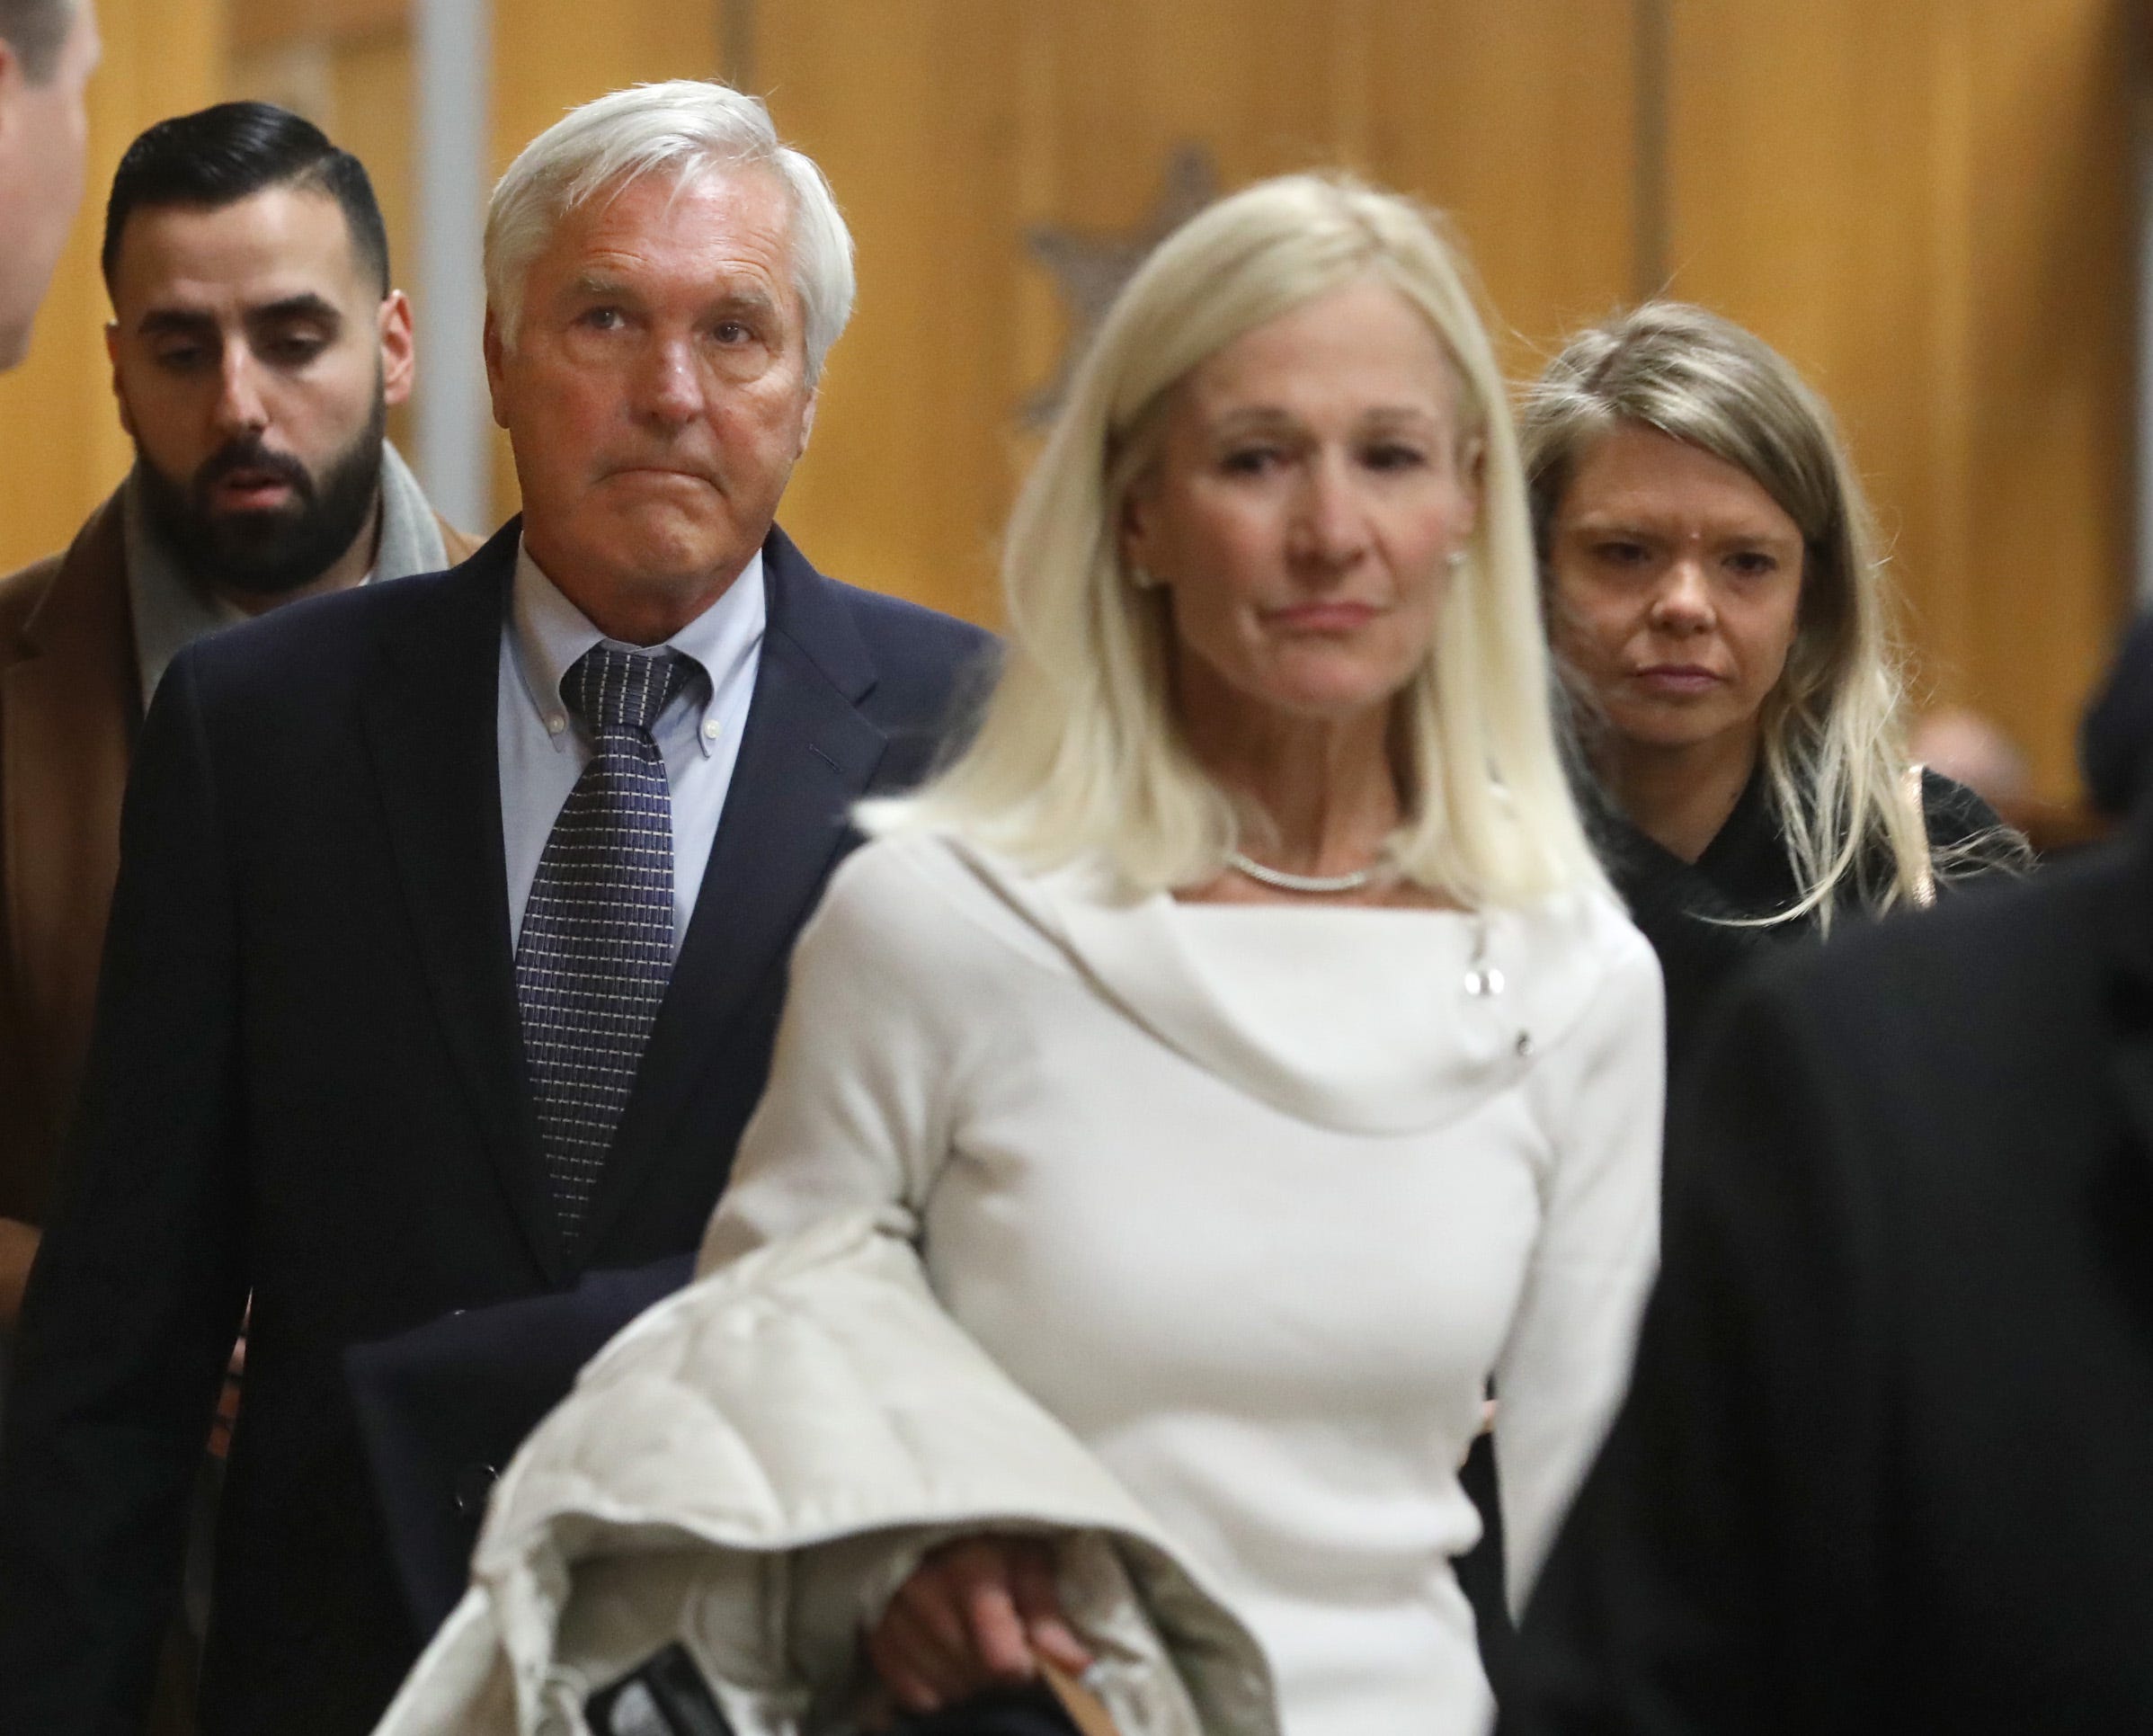 James Krauseneck, second from left, walks into court, with daughter Sara, right, and wife Sharon, to face charges in the 1982 murder of his then-wife Cathleen, Friday, Nov. 8, 2019 at the Hall of Justice in Rochester. 